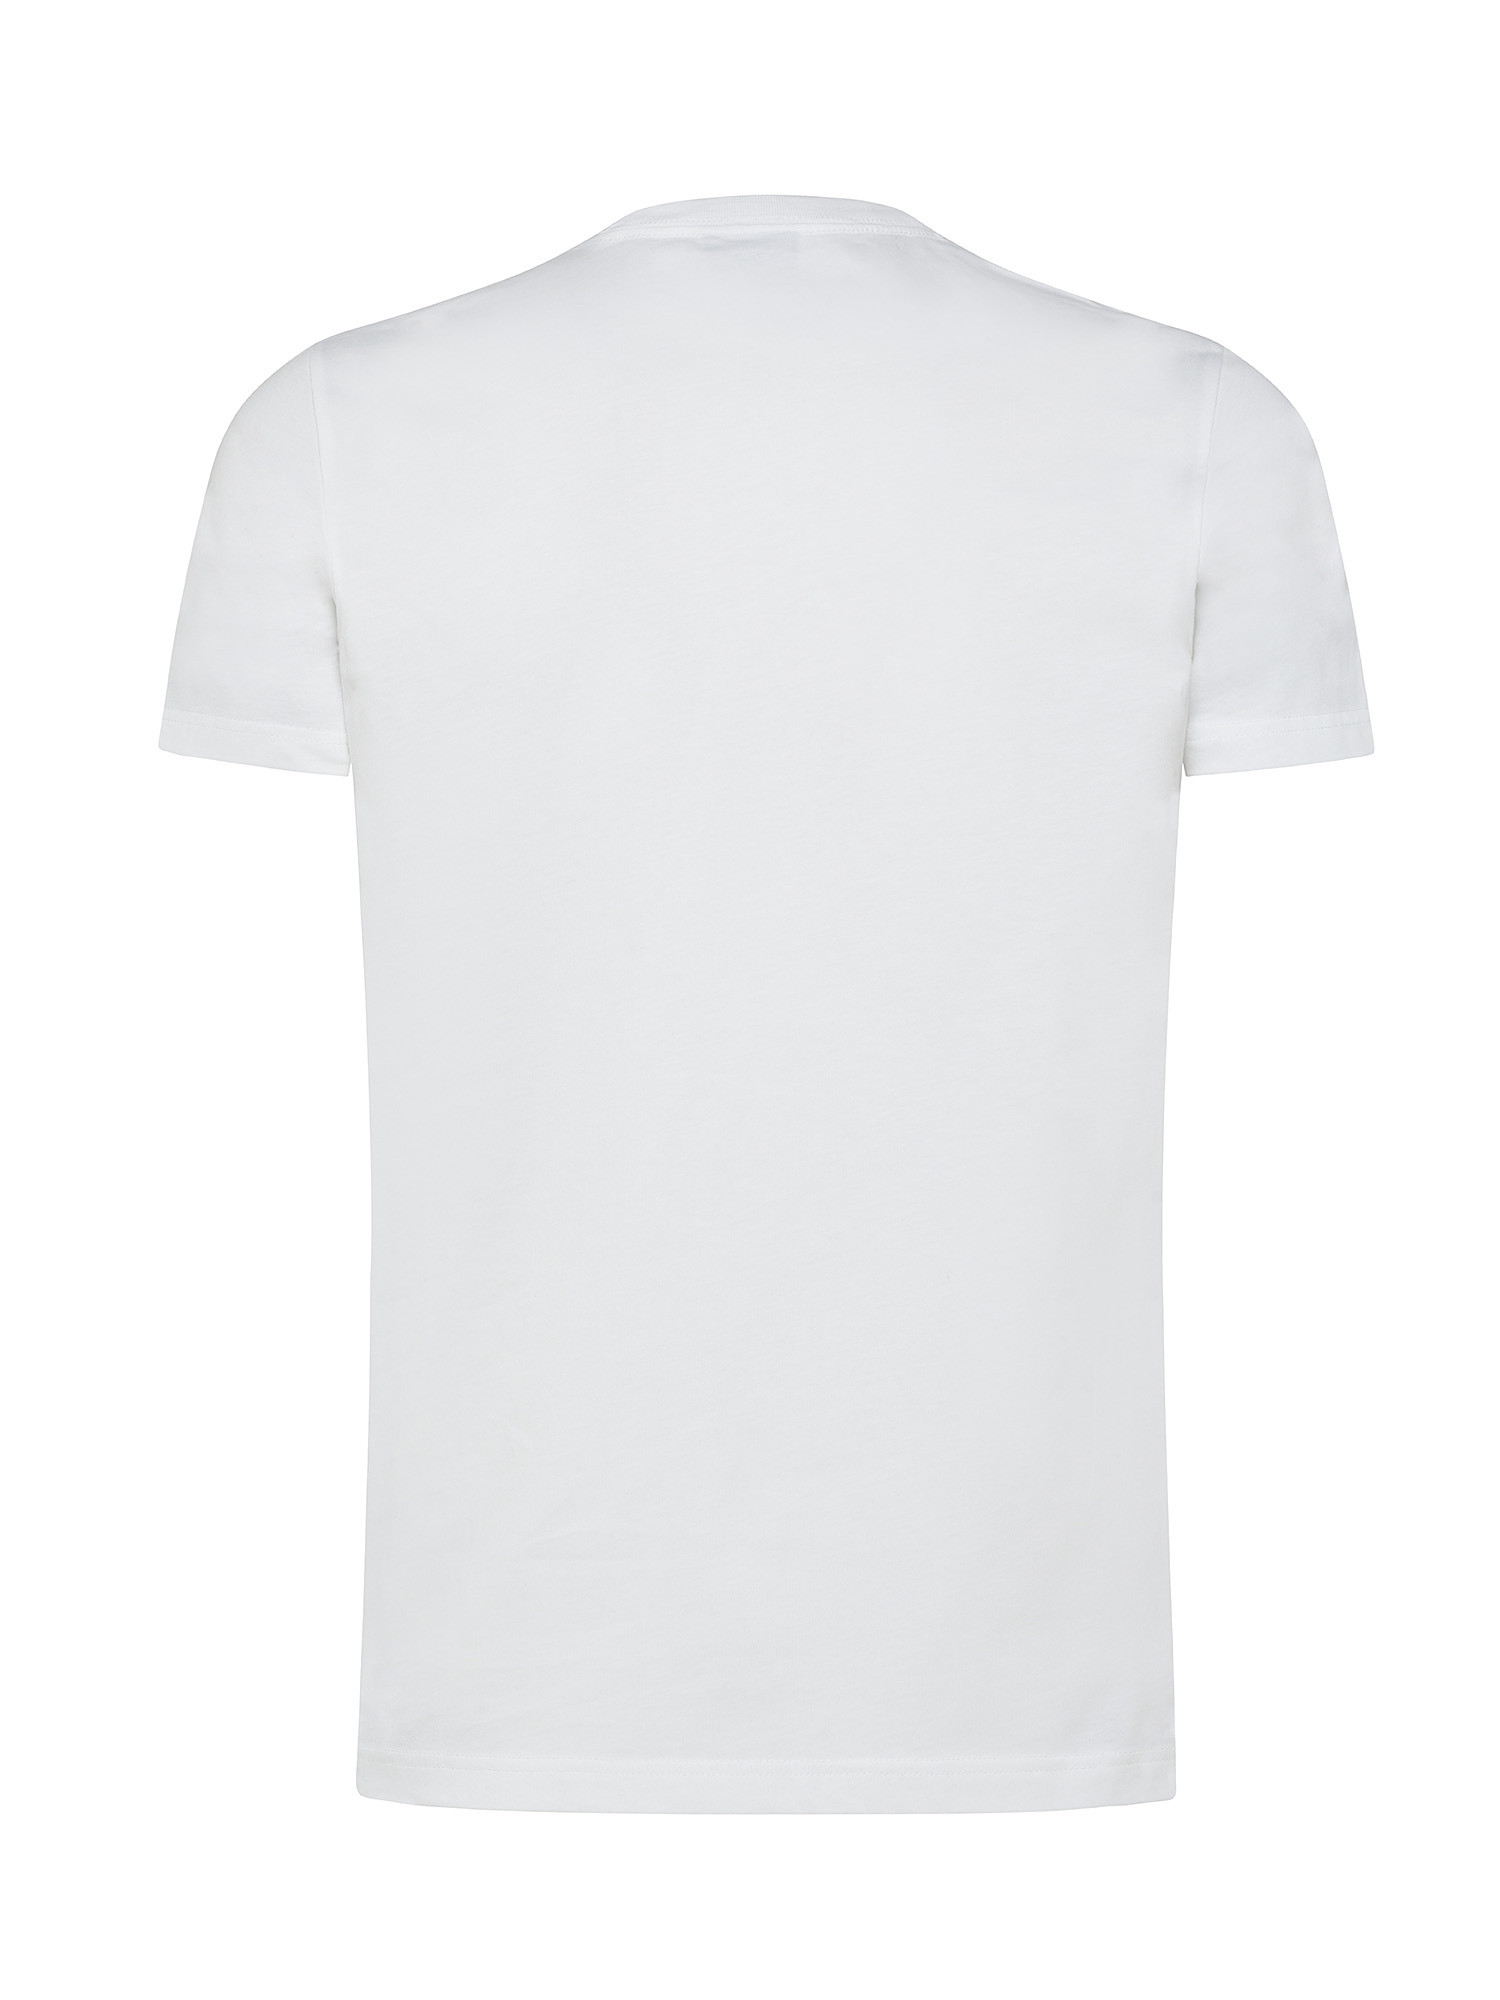 Paul Smith - Slim fit cotton T-shirt with brush strokes print, White, large image number 1